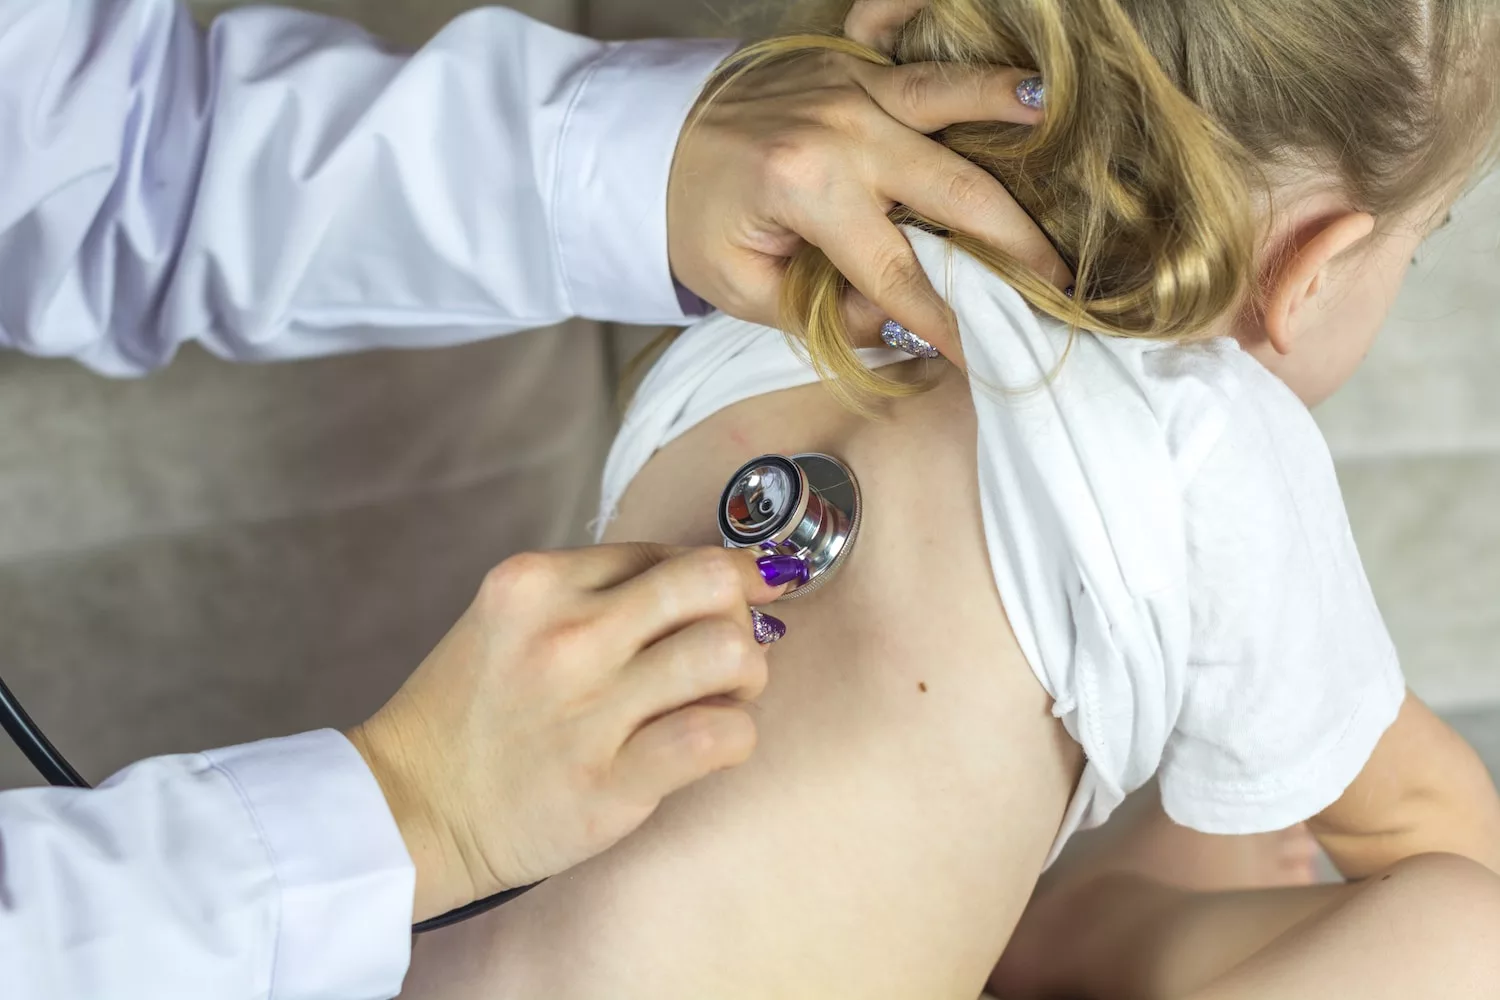 a doctor examining a child's stomach with a stethoscope, ways to preventing bronchitis